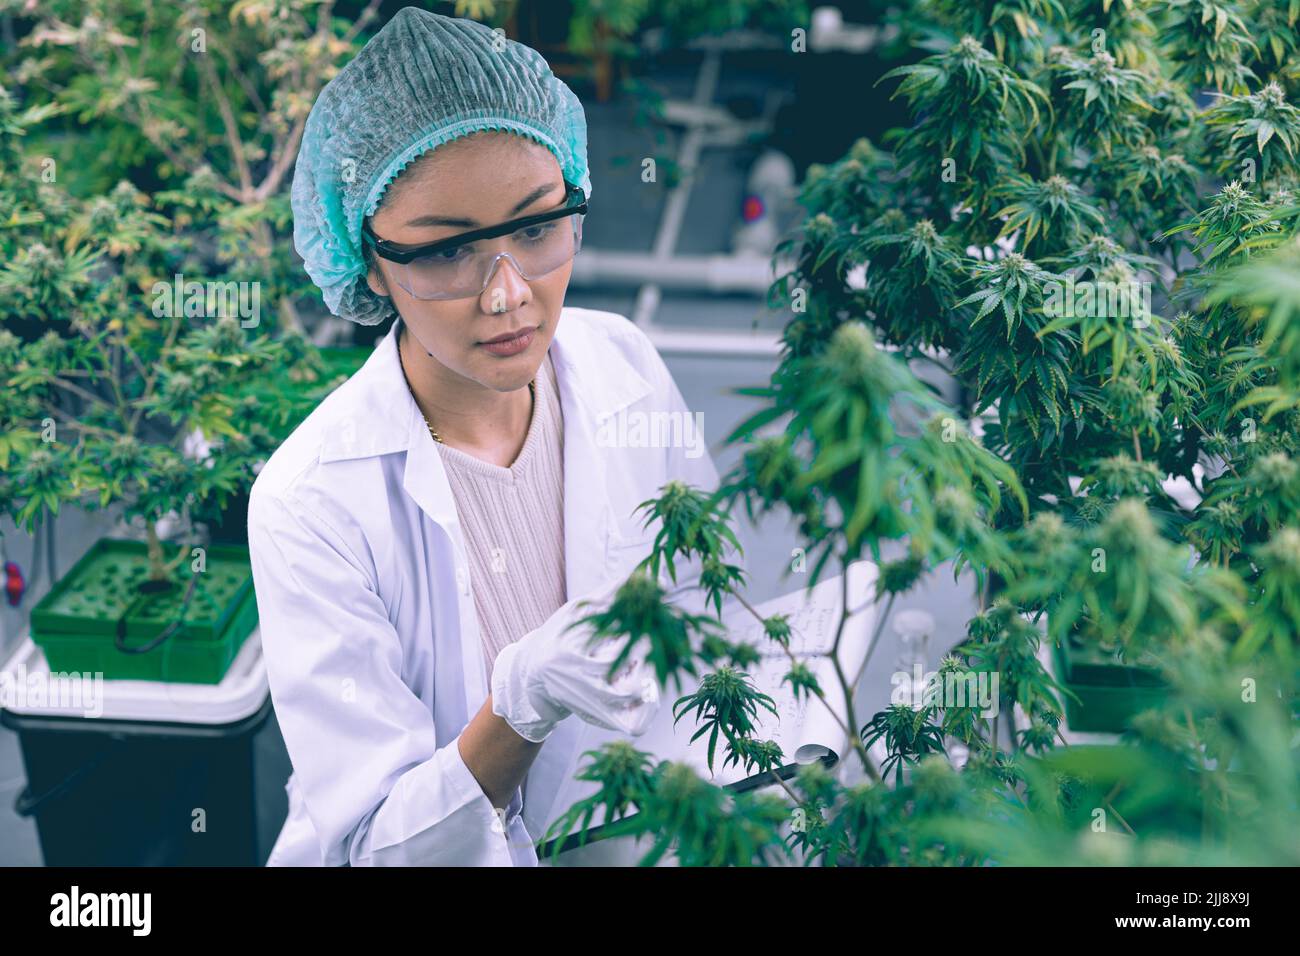 Cannabis Sativa or Cannabis Indica medical plant farming agriculture with scientist working hemp flower bud research for medicine. Stock Photo